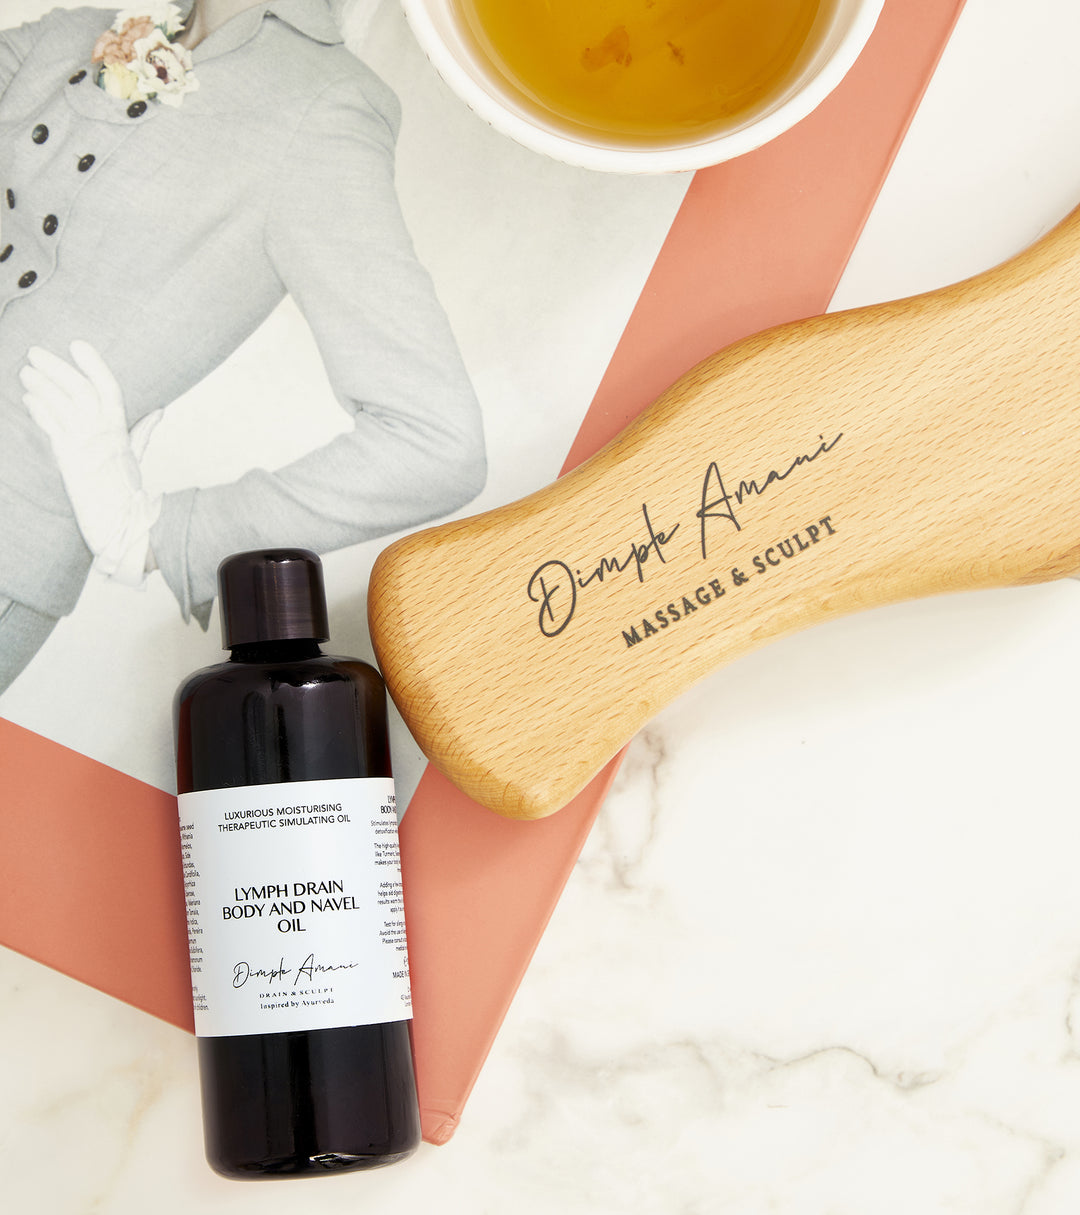 The Lymphatic Bliss Bundle - Lymph Tool + Body Oil – Dimple Amani